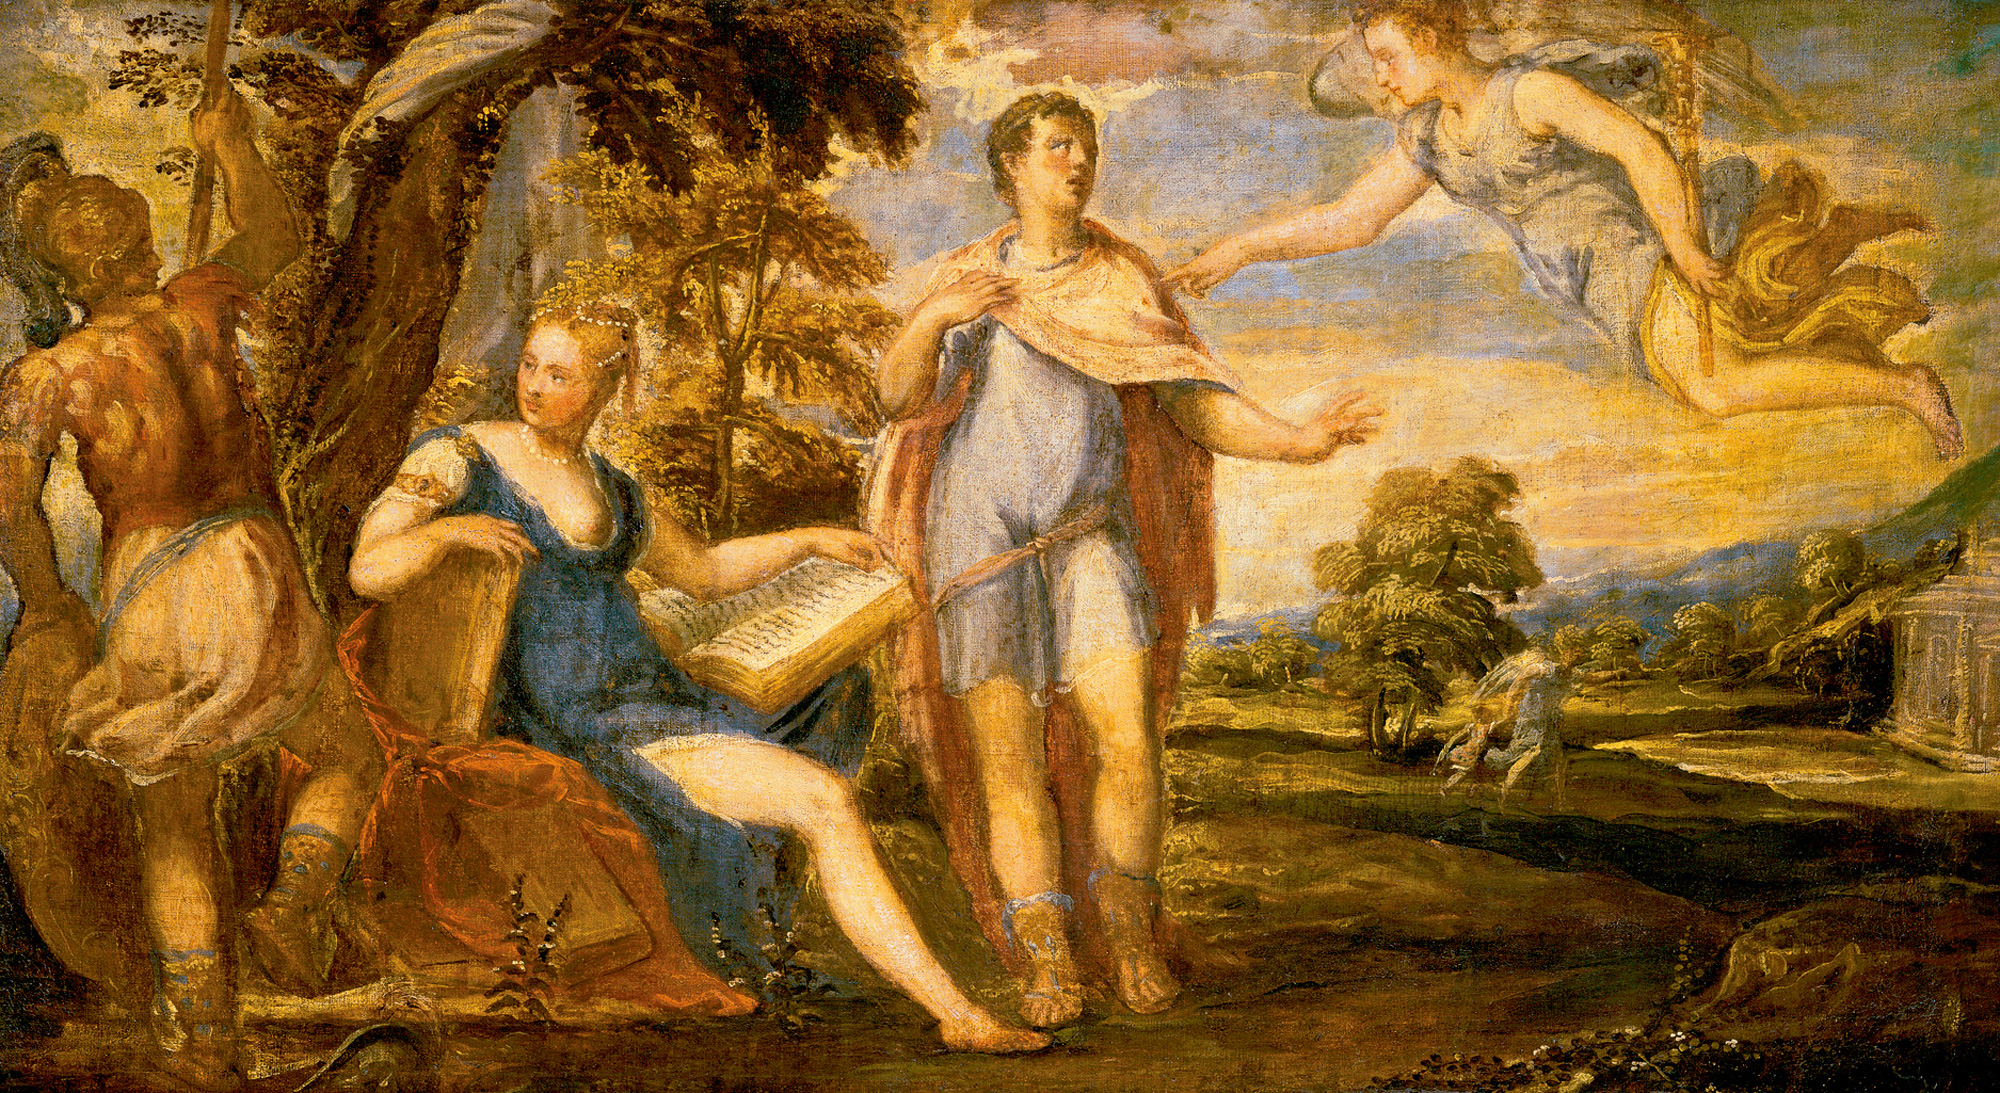 Andrea Schiavone, Aeneas Ordered to Leave Dido, ca. 1555–1560. Courtesy Art Resource, NY.